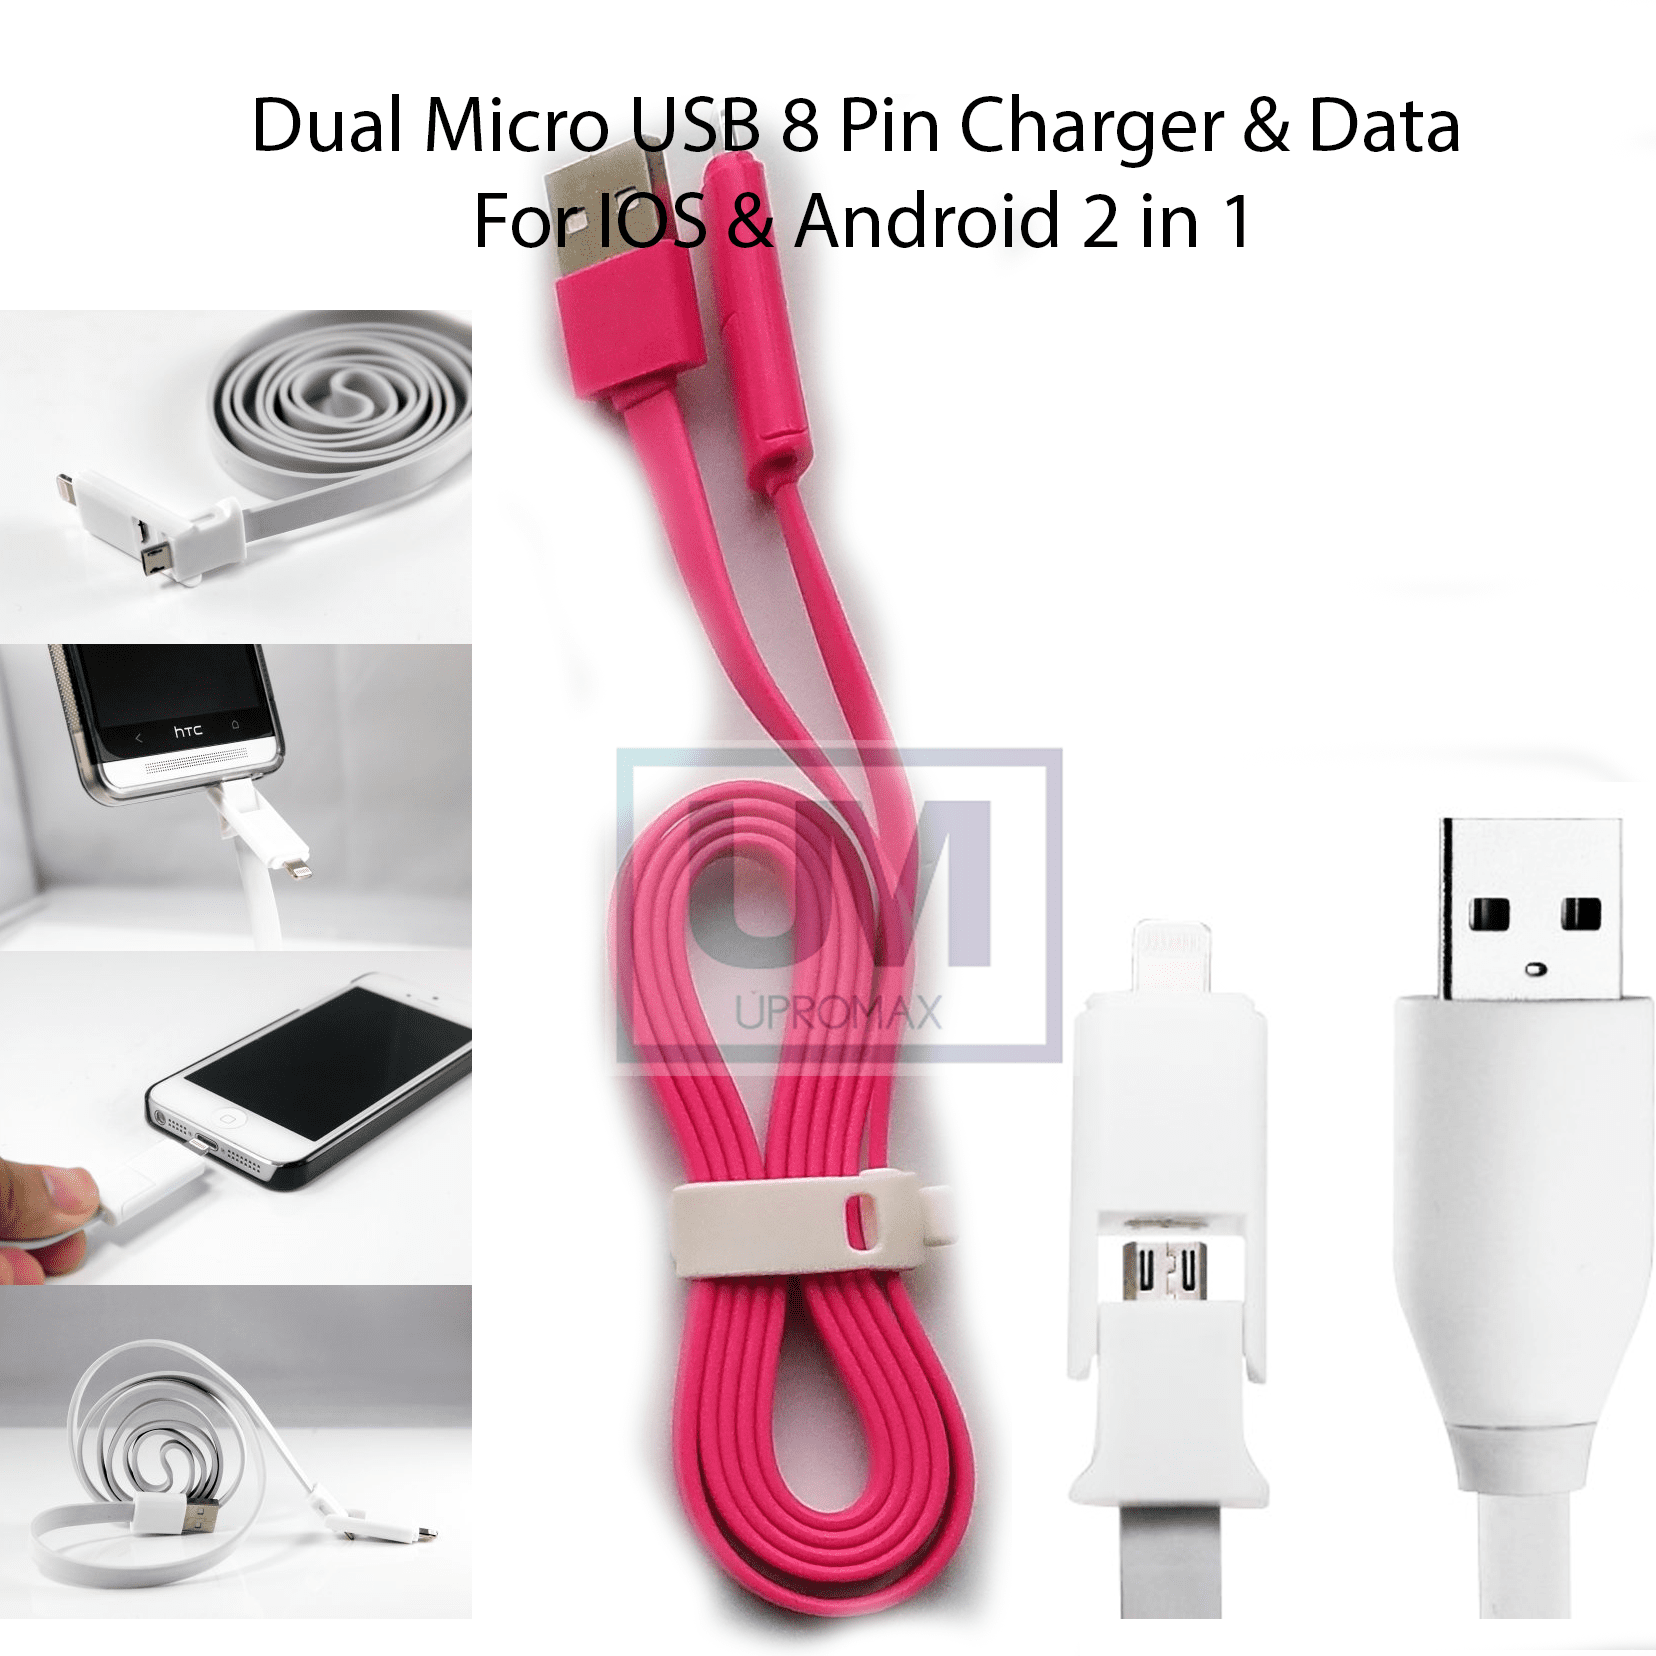 Charging Only KyleCServaiss USB Cable Multi Charger Cable,Universal 3 in 1 Multiple Ports Devices USB Charging Cord with iOS/Android/Type C/Micro USB Connectors for Phones Tablets 